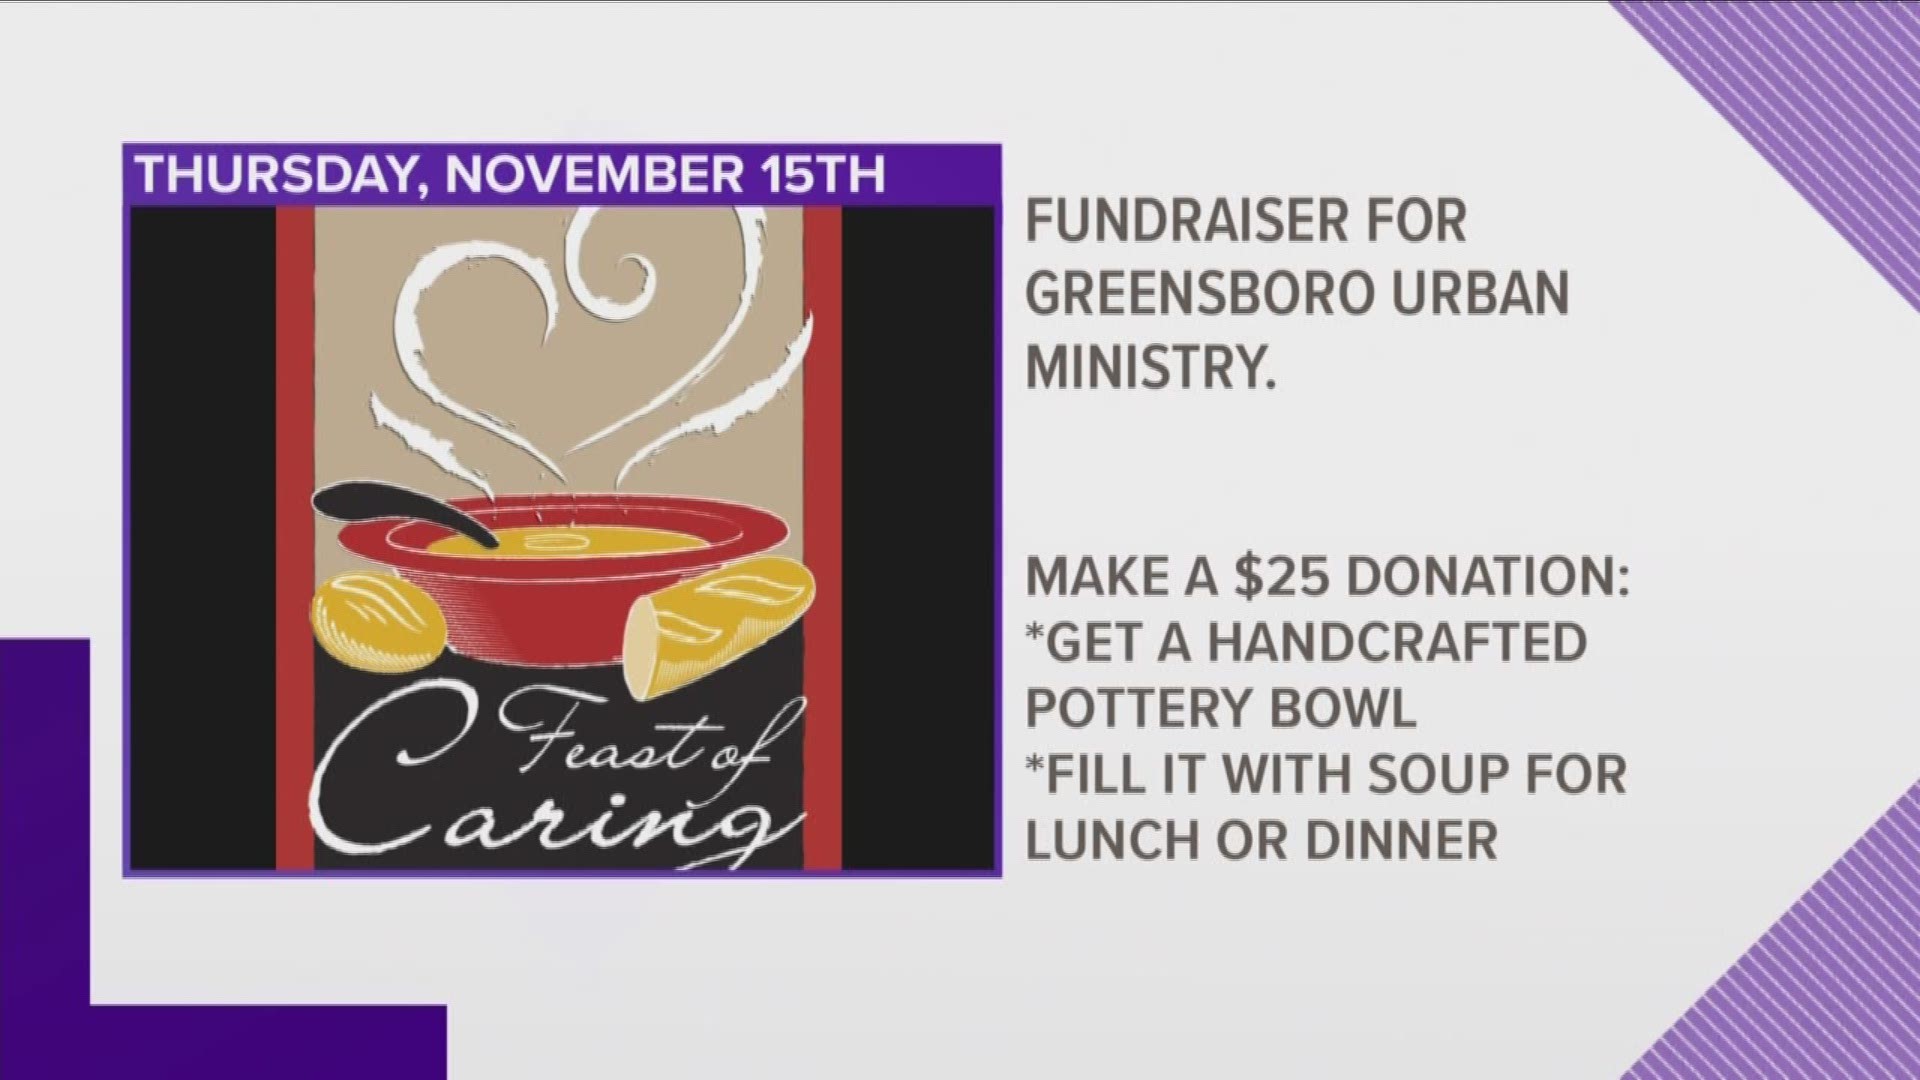 The Feast of Caring is a fundraiser for Greensboro Urban Ministry. You make a $25 donation and you choose a handcrafted pottery bowl to take home.